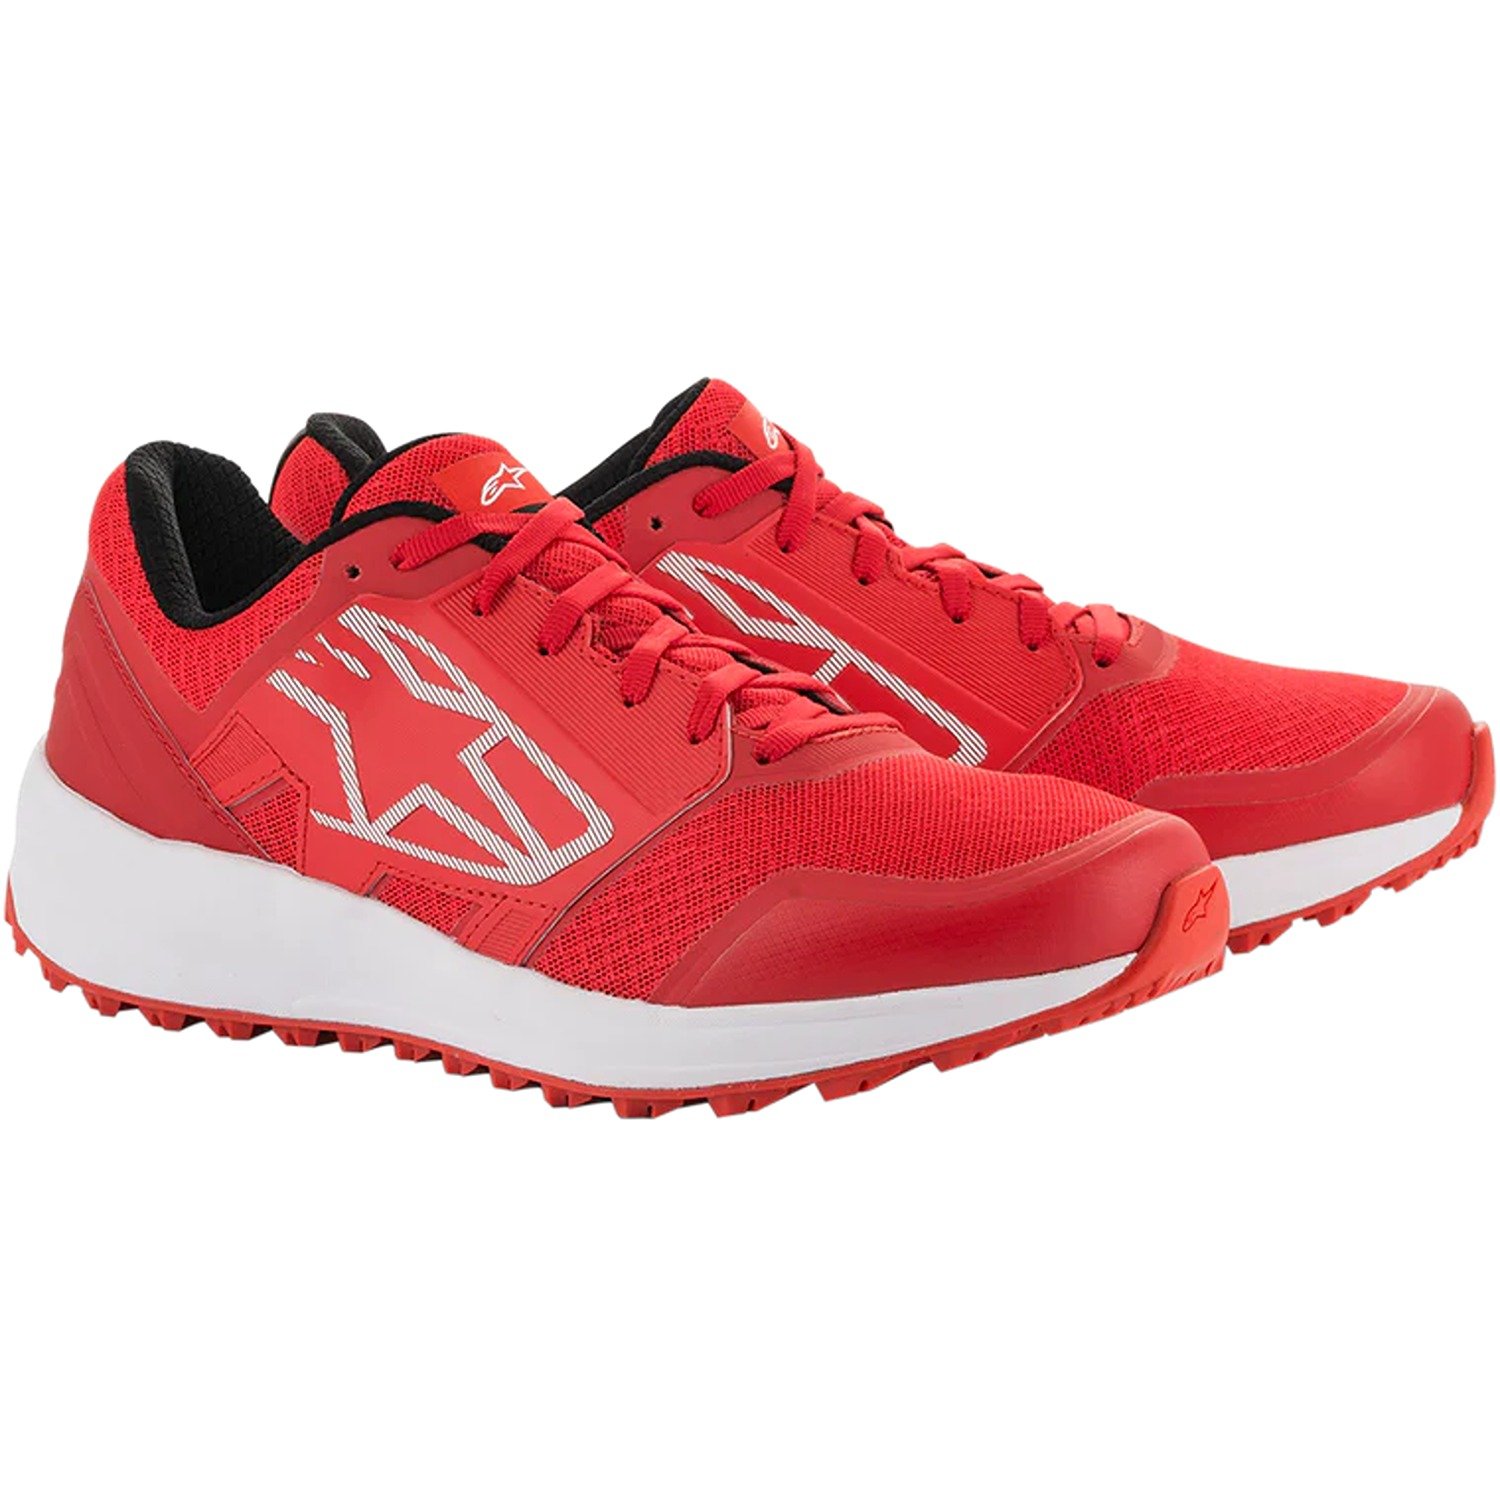 Image of EU Alpinestars Meta Trail Shoes Red White Taille US 8